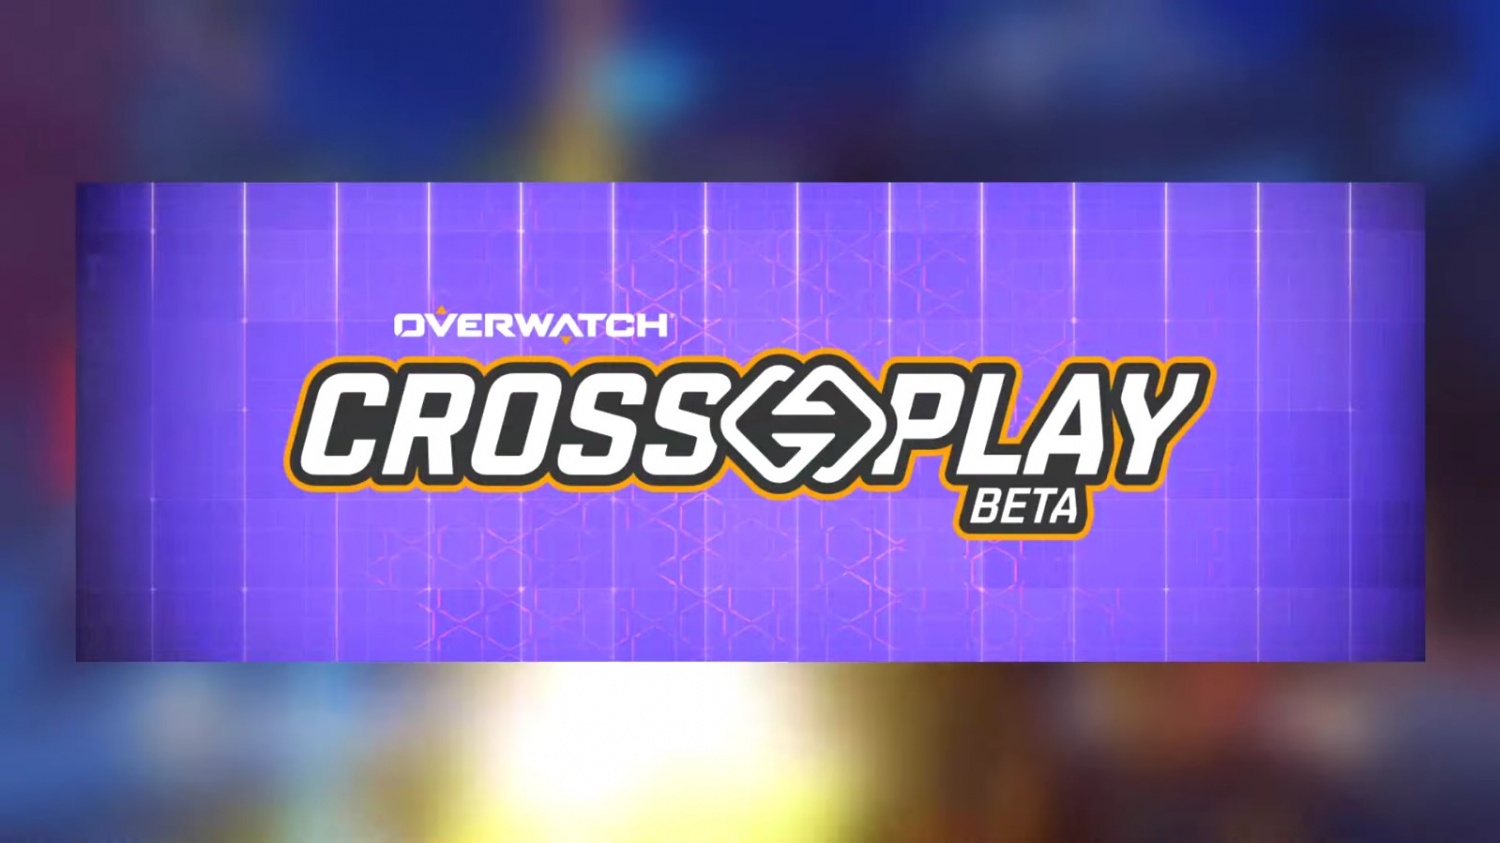 Overwatch Cross Play Beta Faq How To Play The Fps Through Linking Between Pc Console Games Gamenguide